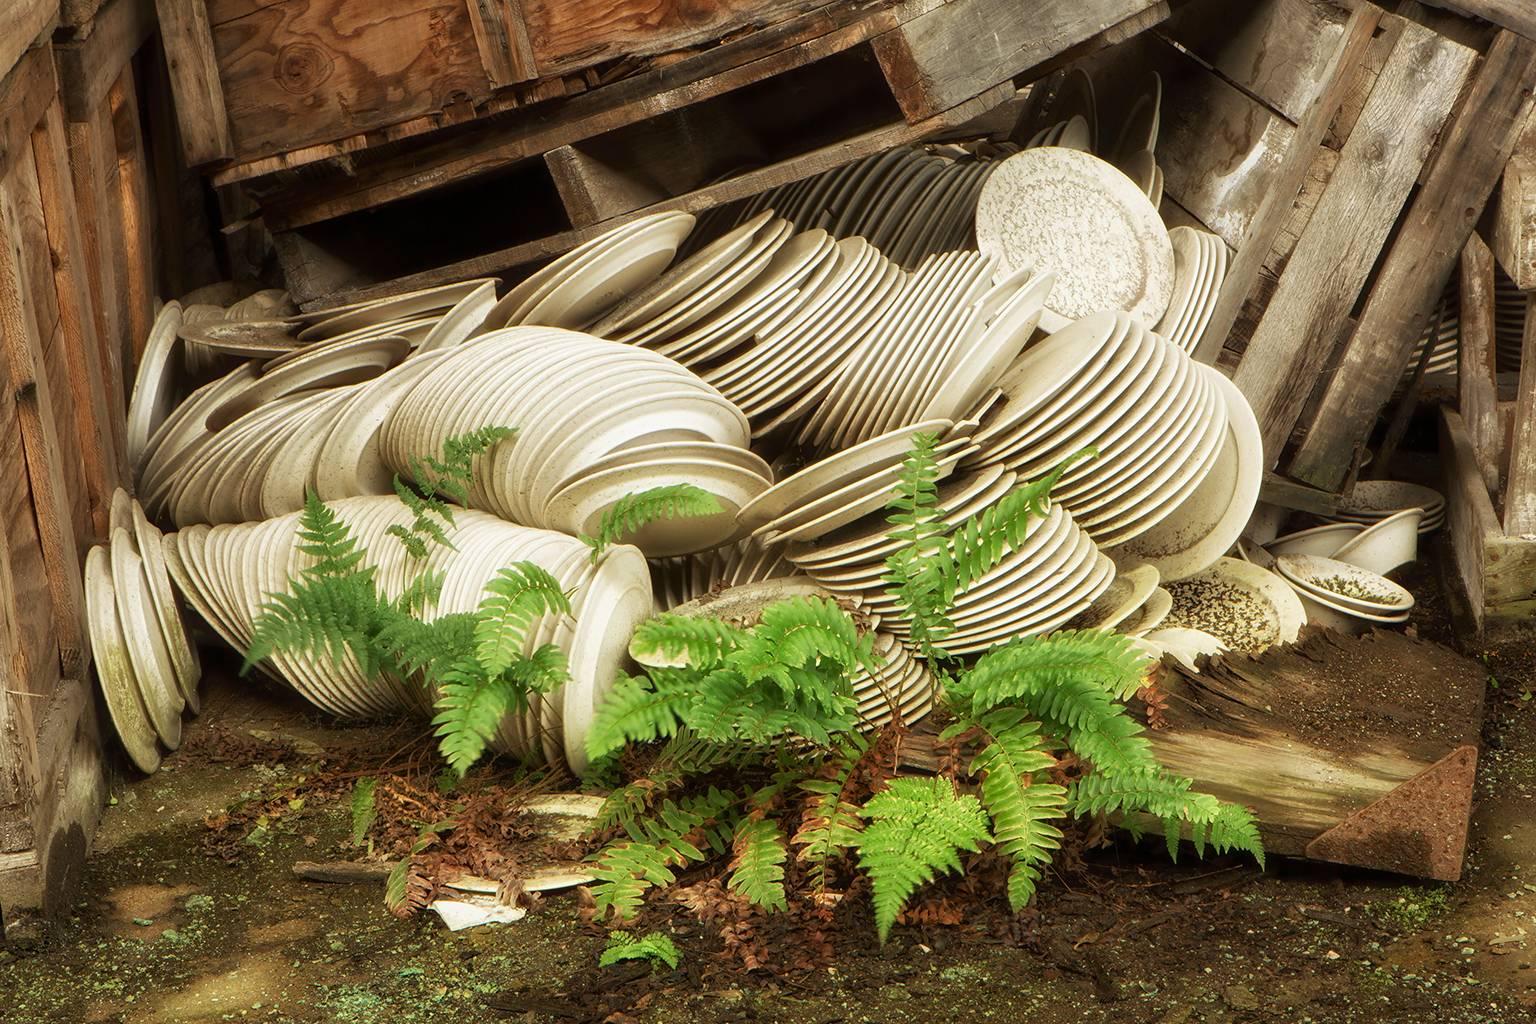 "Stacked", color photograph, abandoned, china, factory, dishes, ferns, green